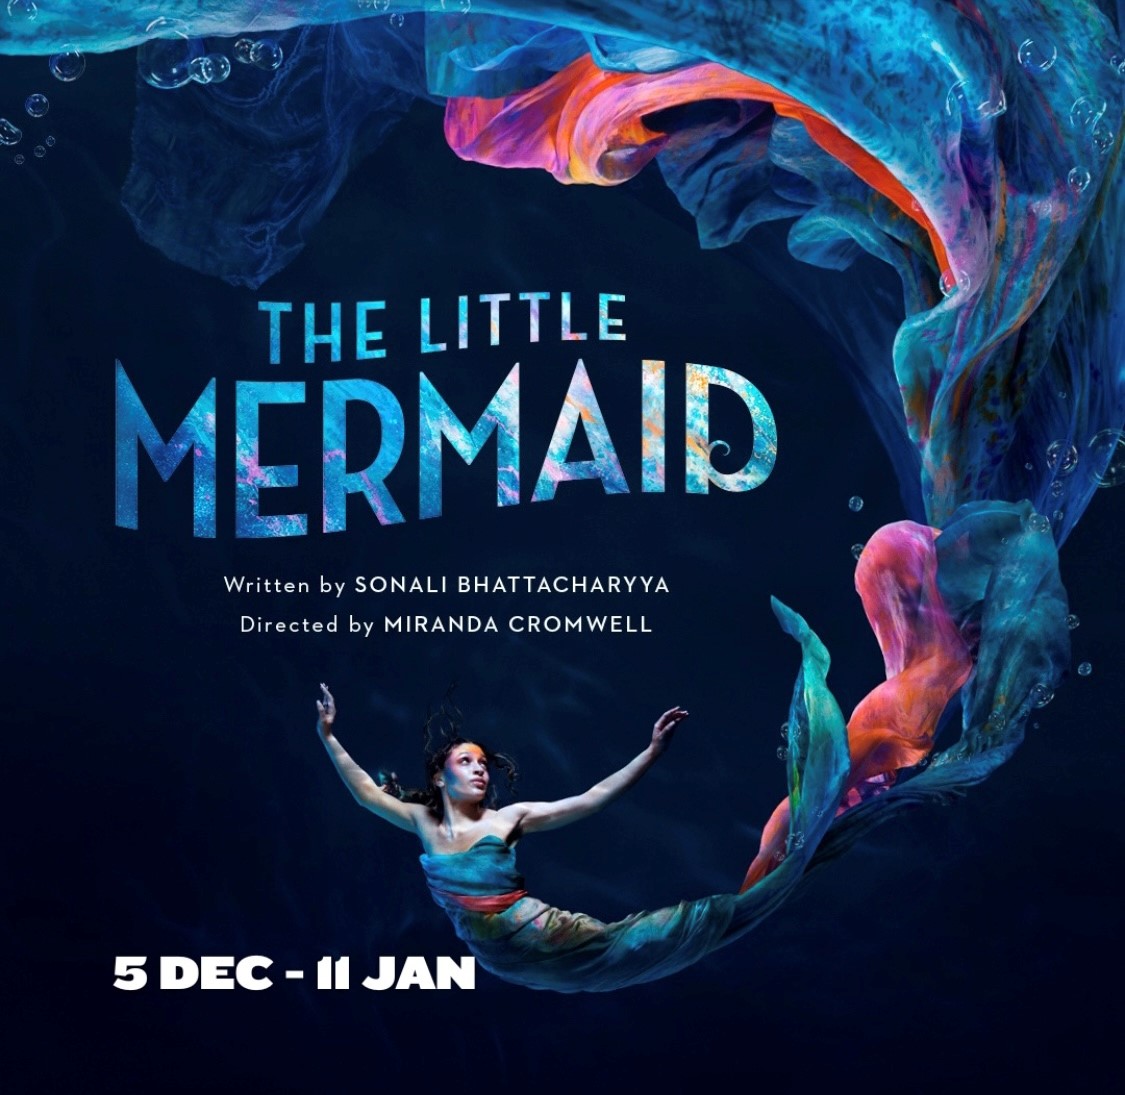 Sonali Bhattacharyya's (@sonali_db) adaptation of The Little Mermaid will play at @BristolOldVic from 5 Dec - 11 Jan🧜‍♀️ Tickets on sale now! ➡️ bristololdvic.org.uk/whats-on/the-l…